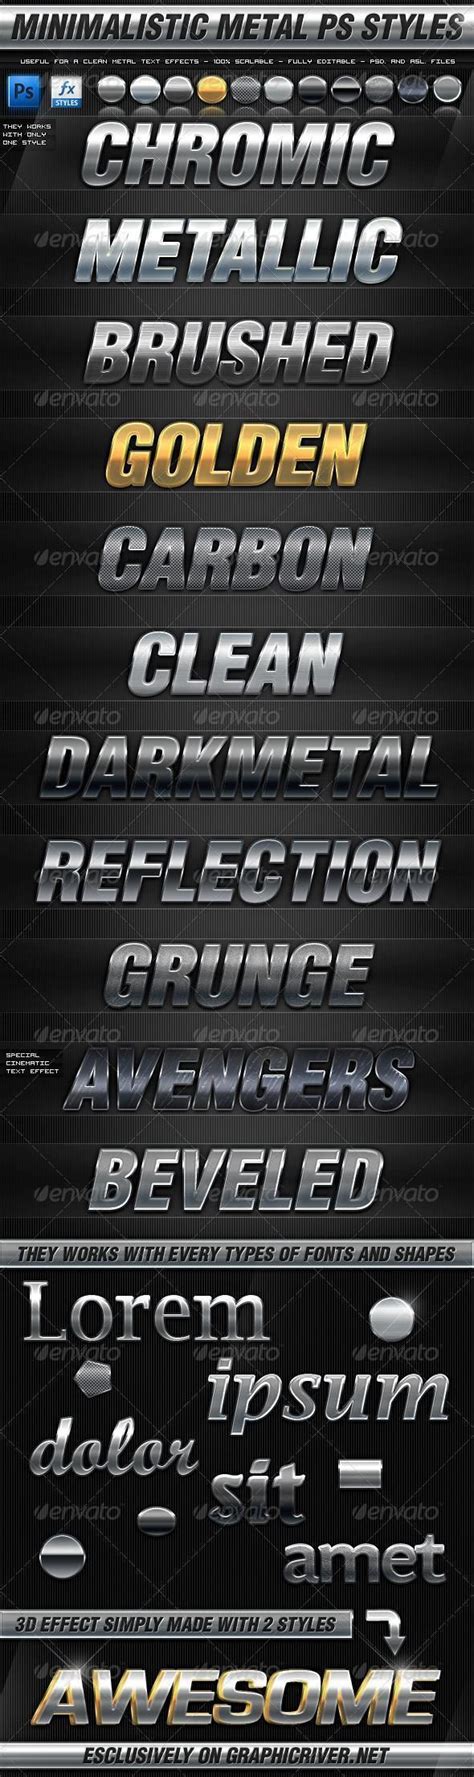 Classic Metal Ps Styles Premium Photoshop Text Effects Photoshop